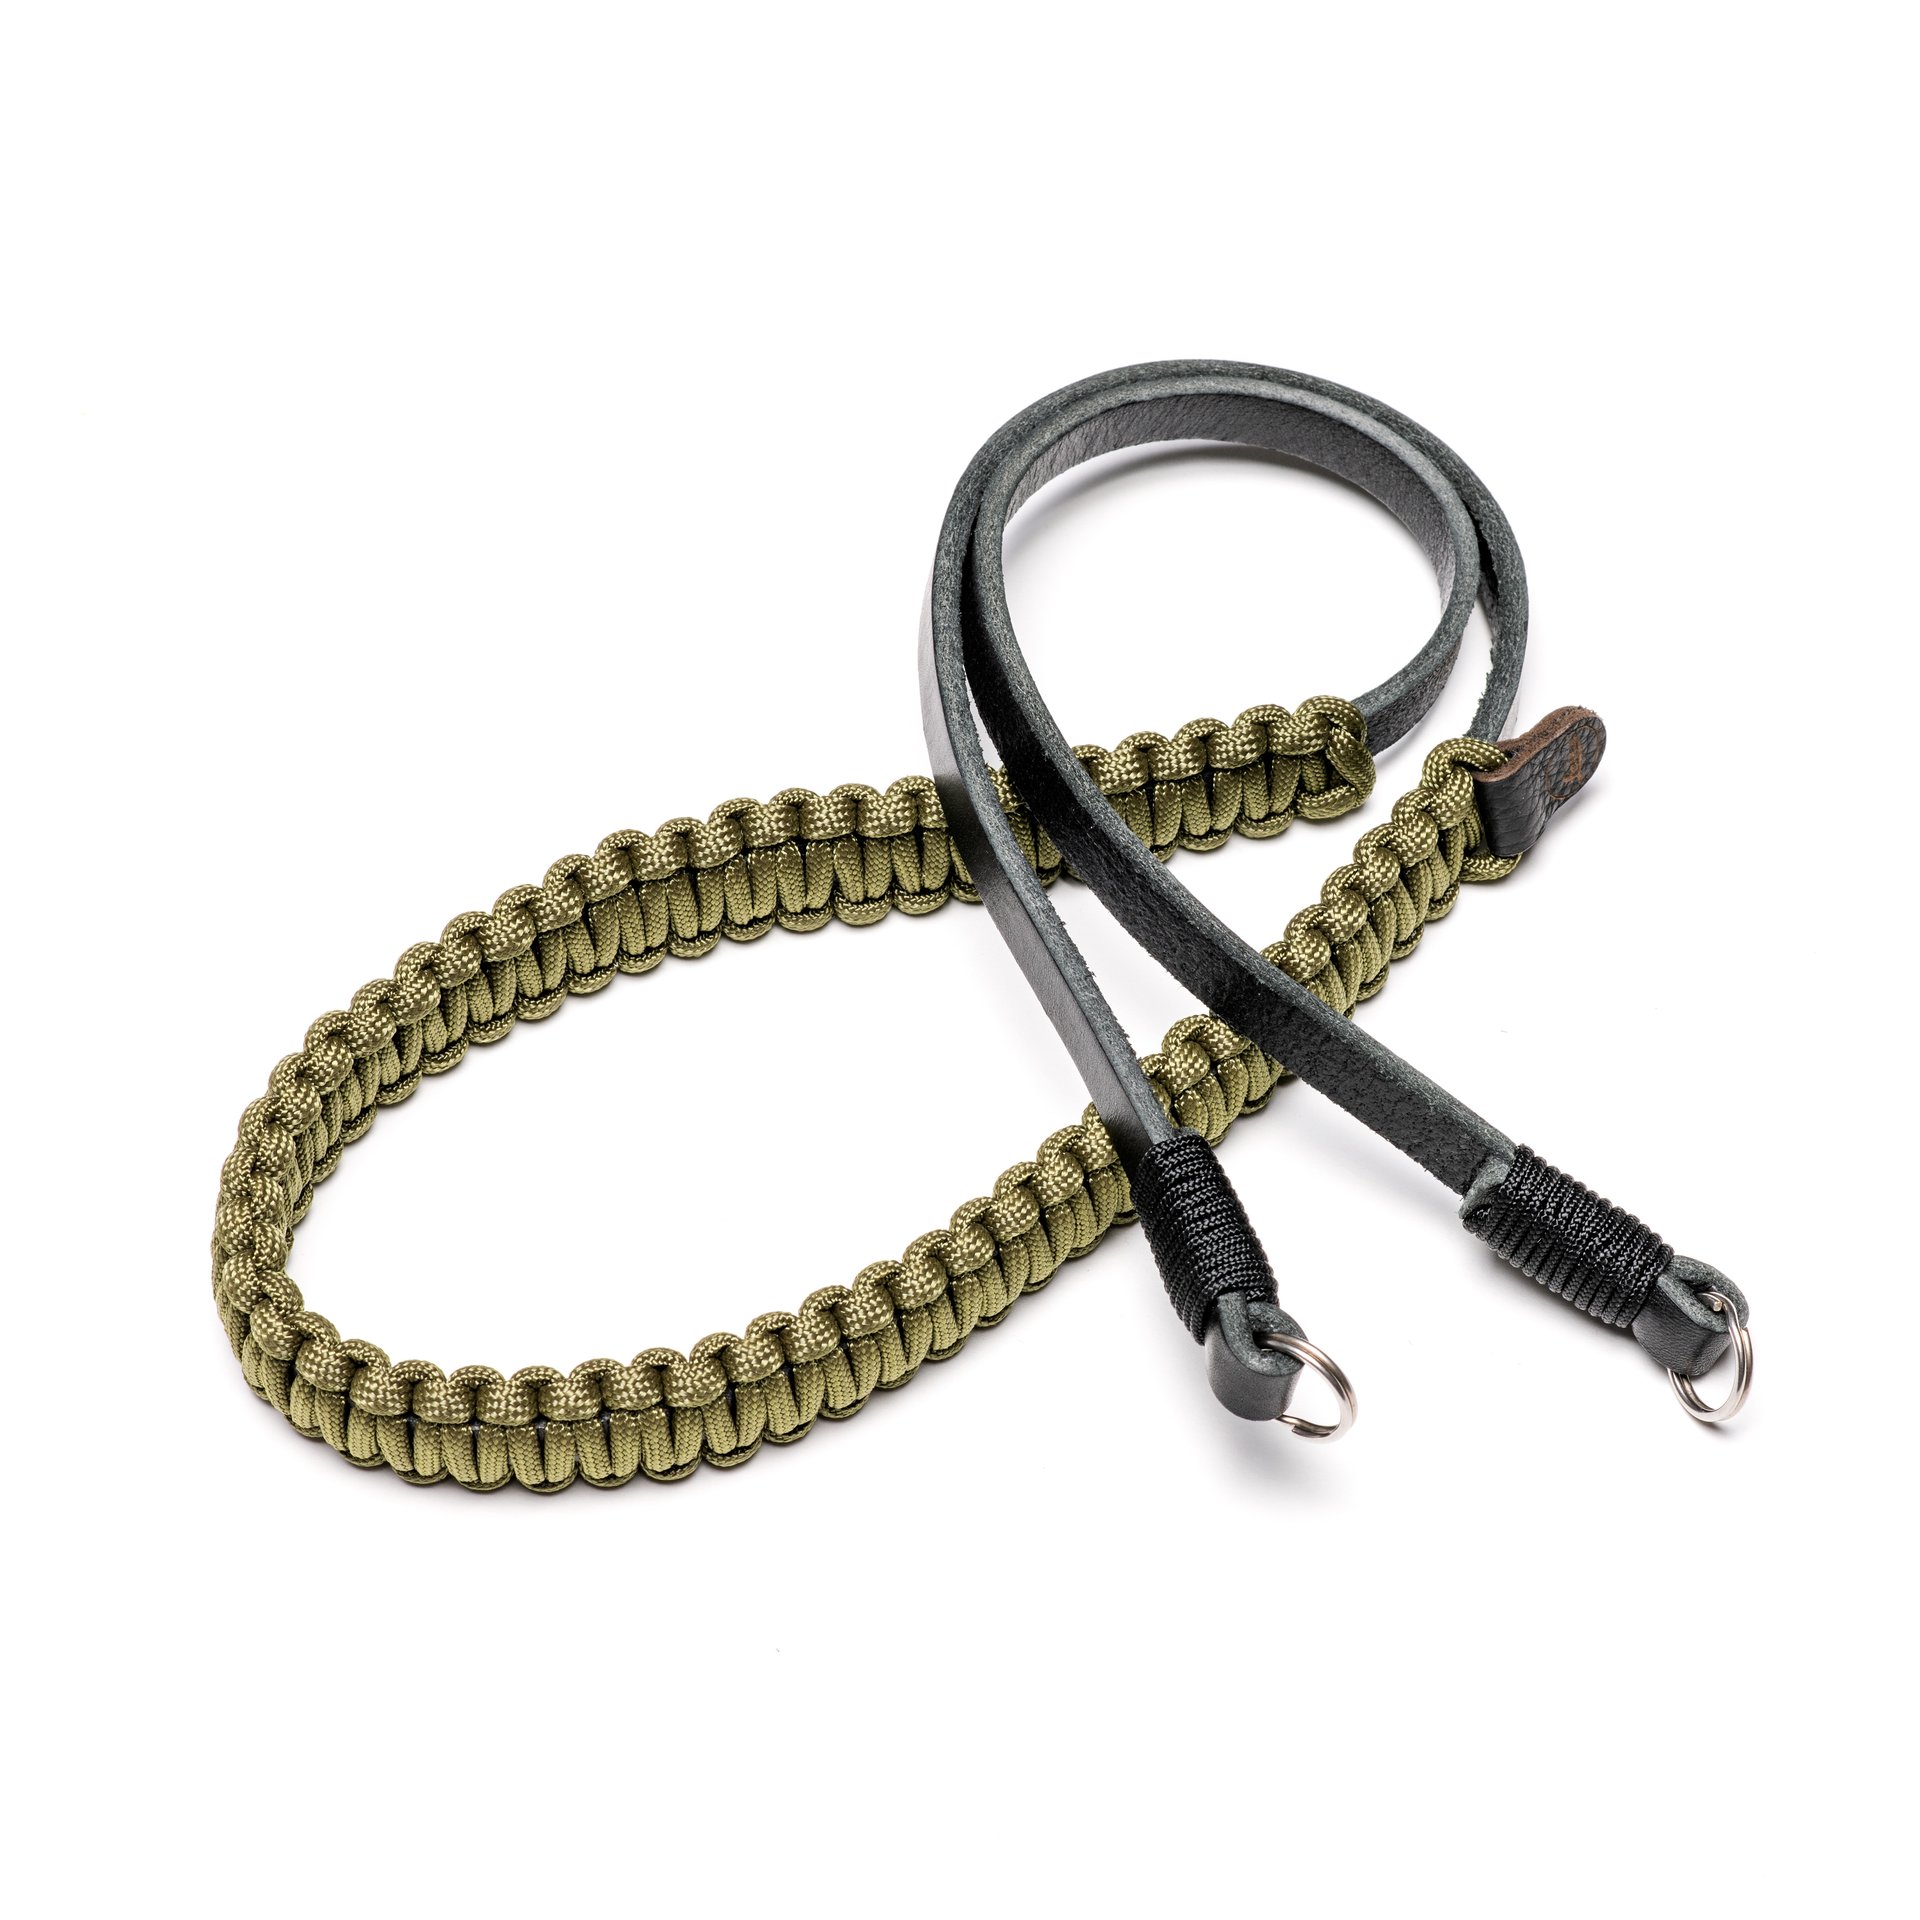 TThumbnail image for Leica COOPH Paracord Strap - Black/olive